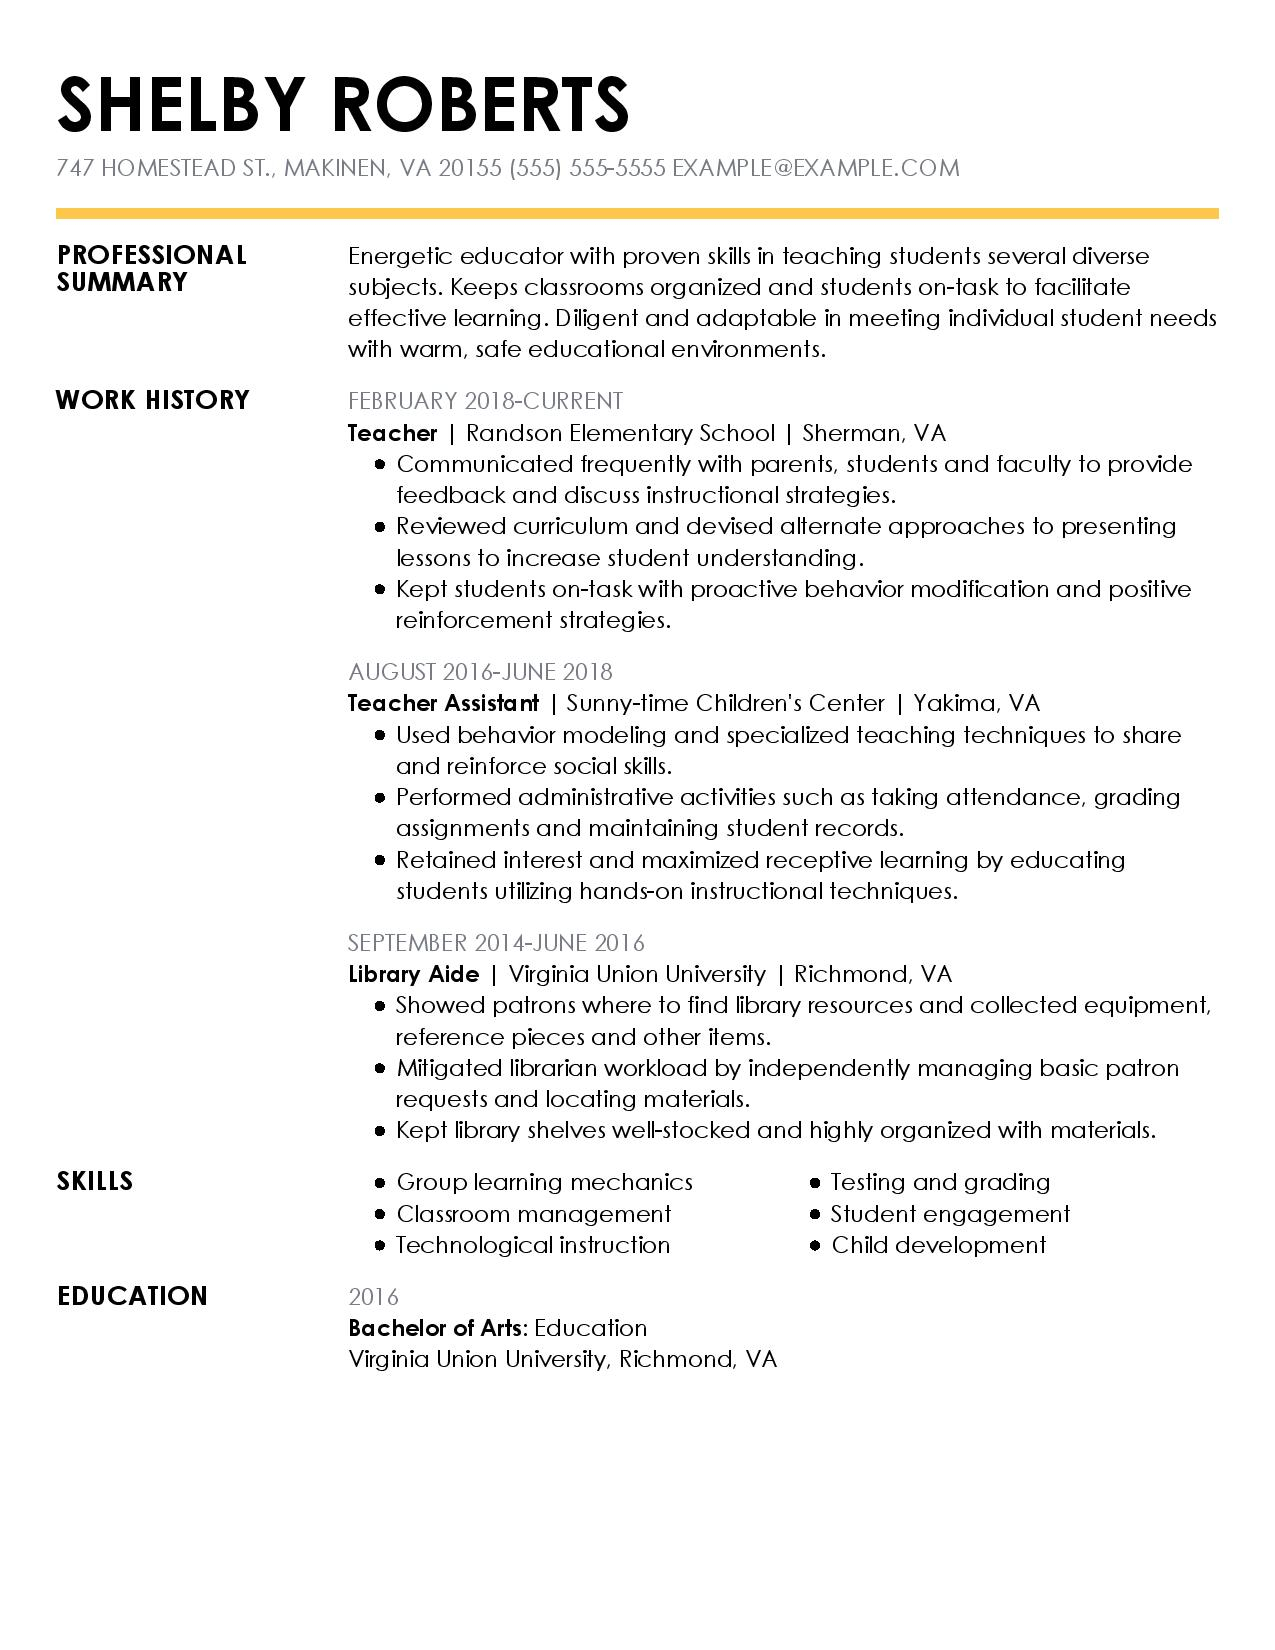 View 30 Samples Of Resumes Industry Experience Level within dimensions 1275 X 1650